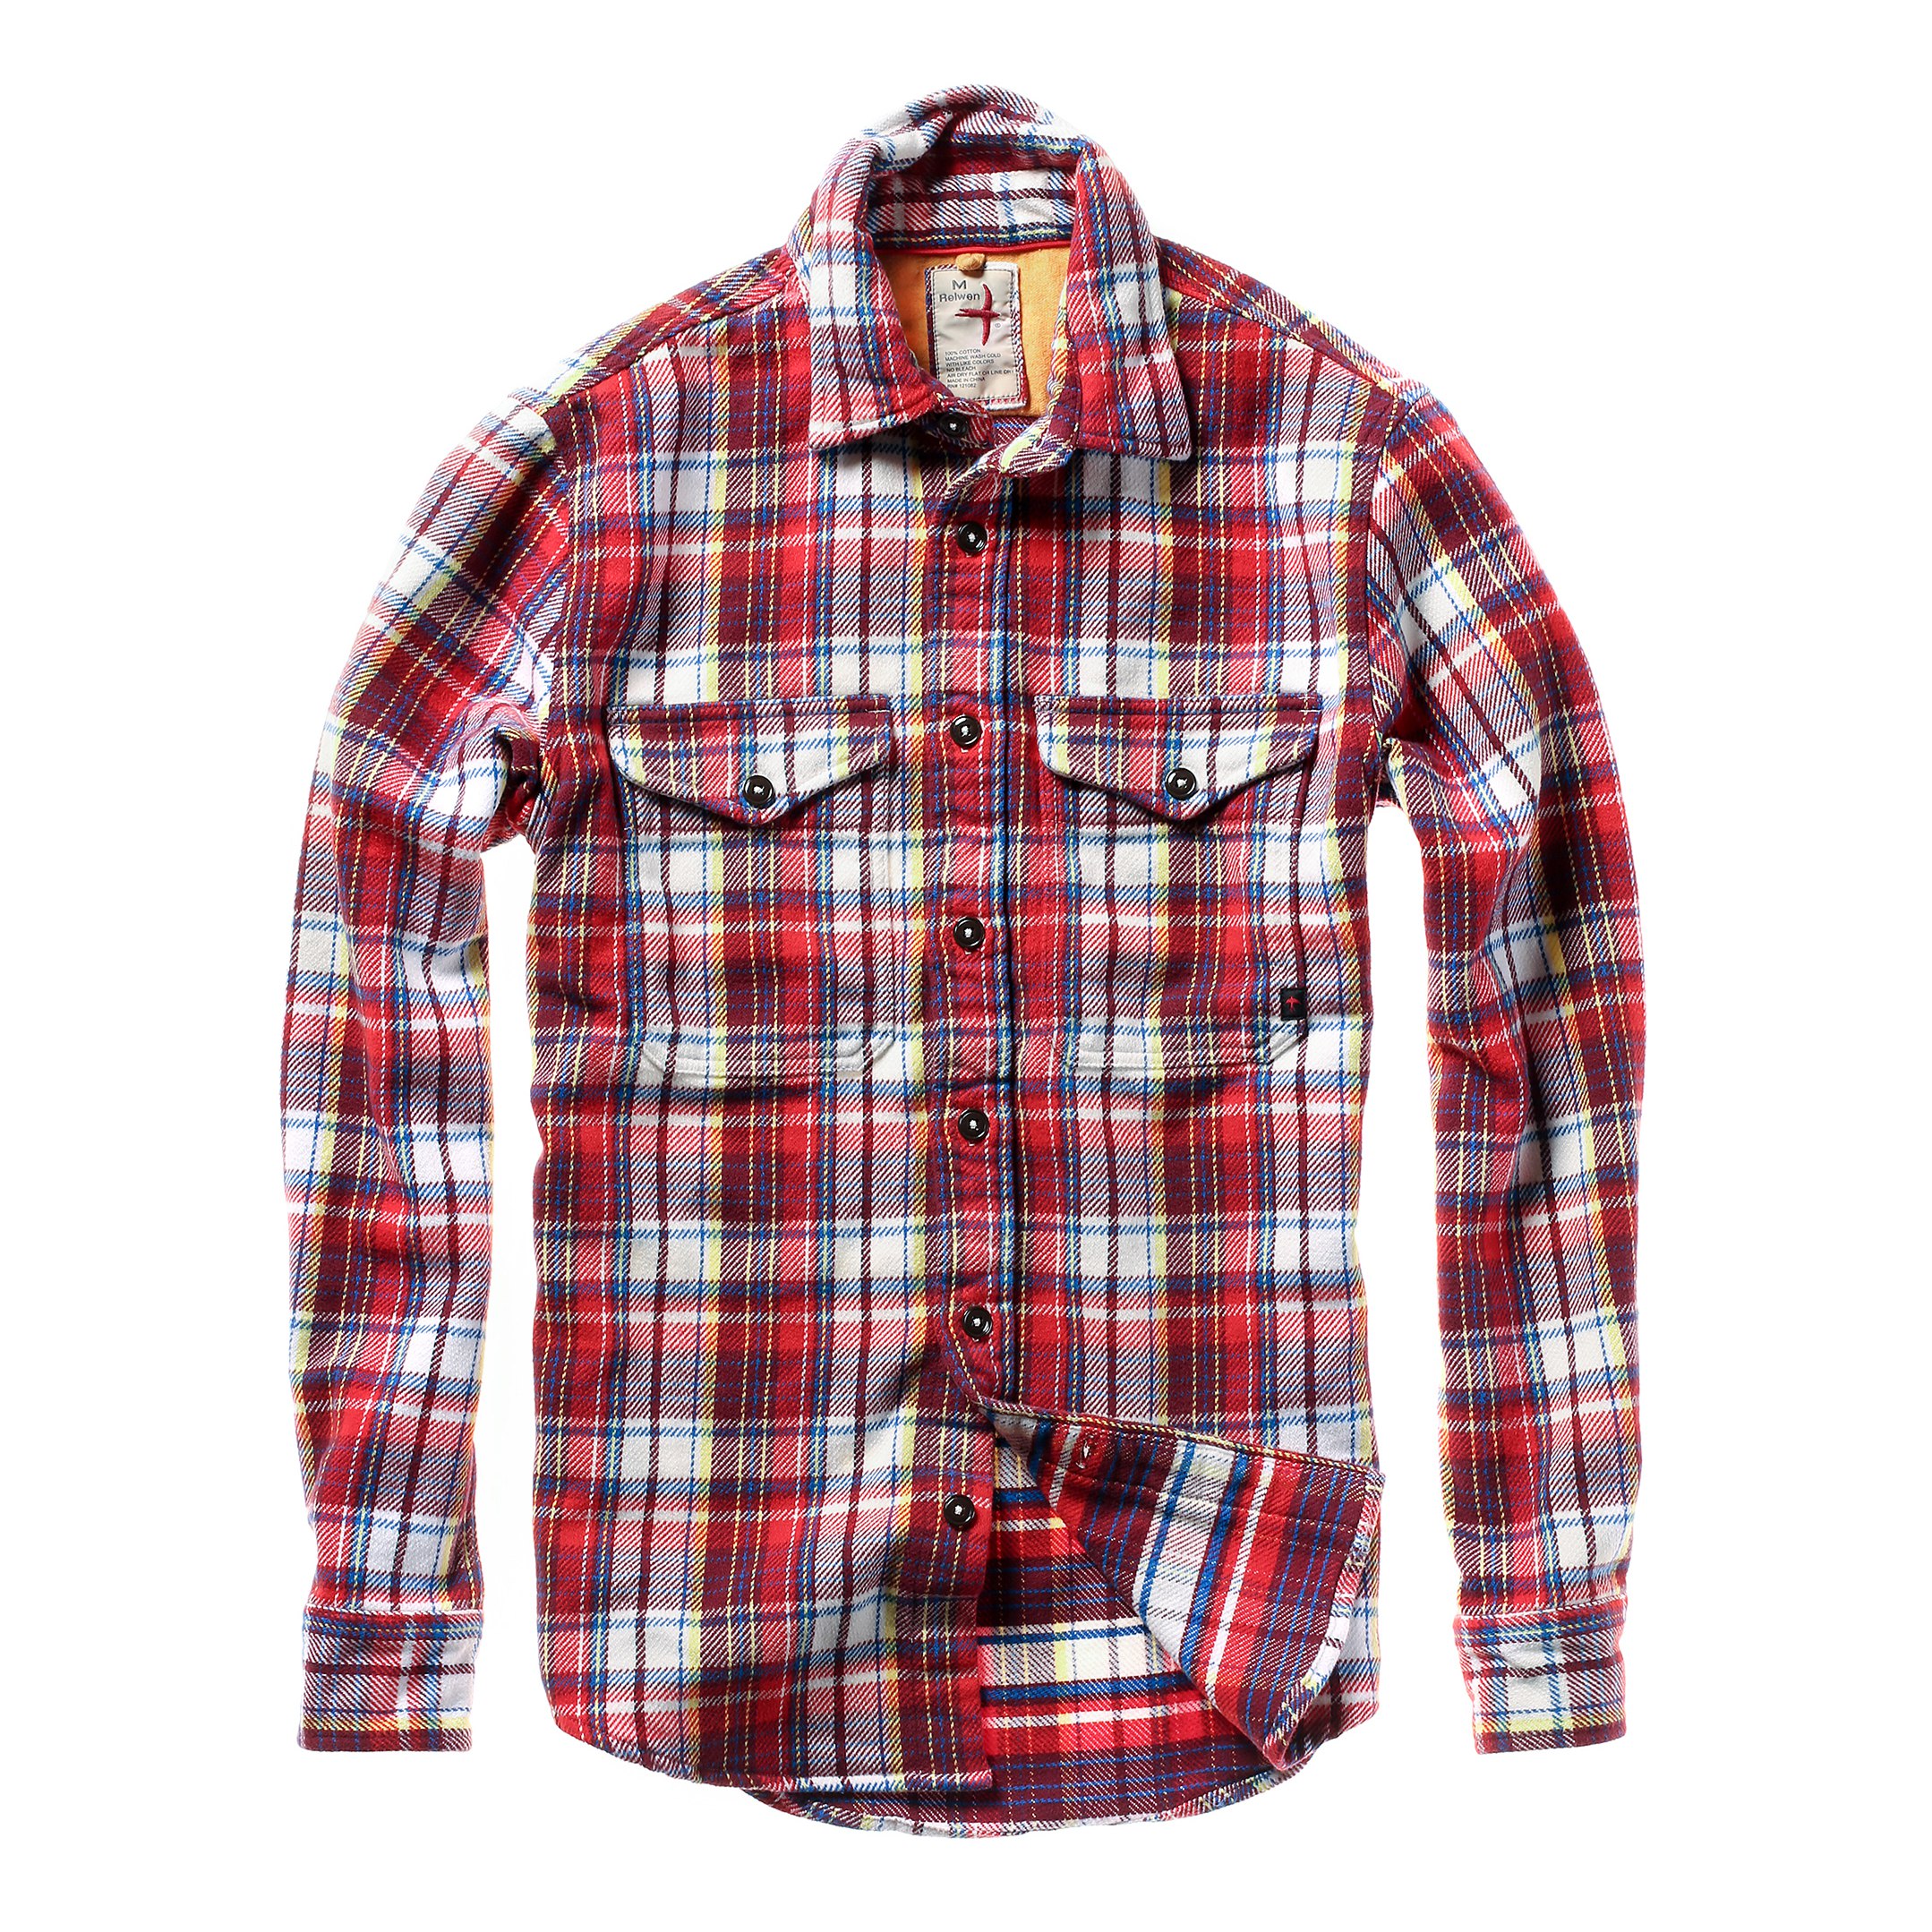 The Best of Flannel with Relwen Brushed Flannel Blanket Shirt - Worn ...